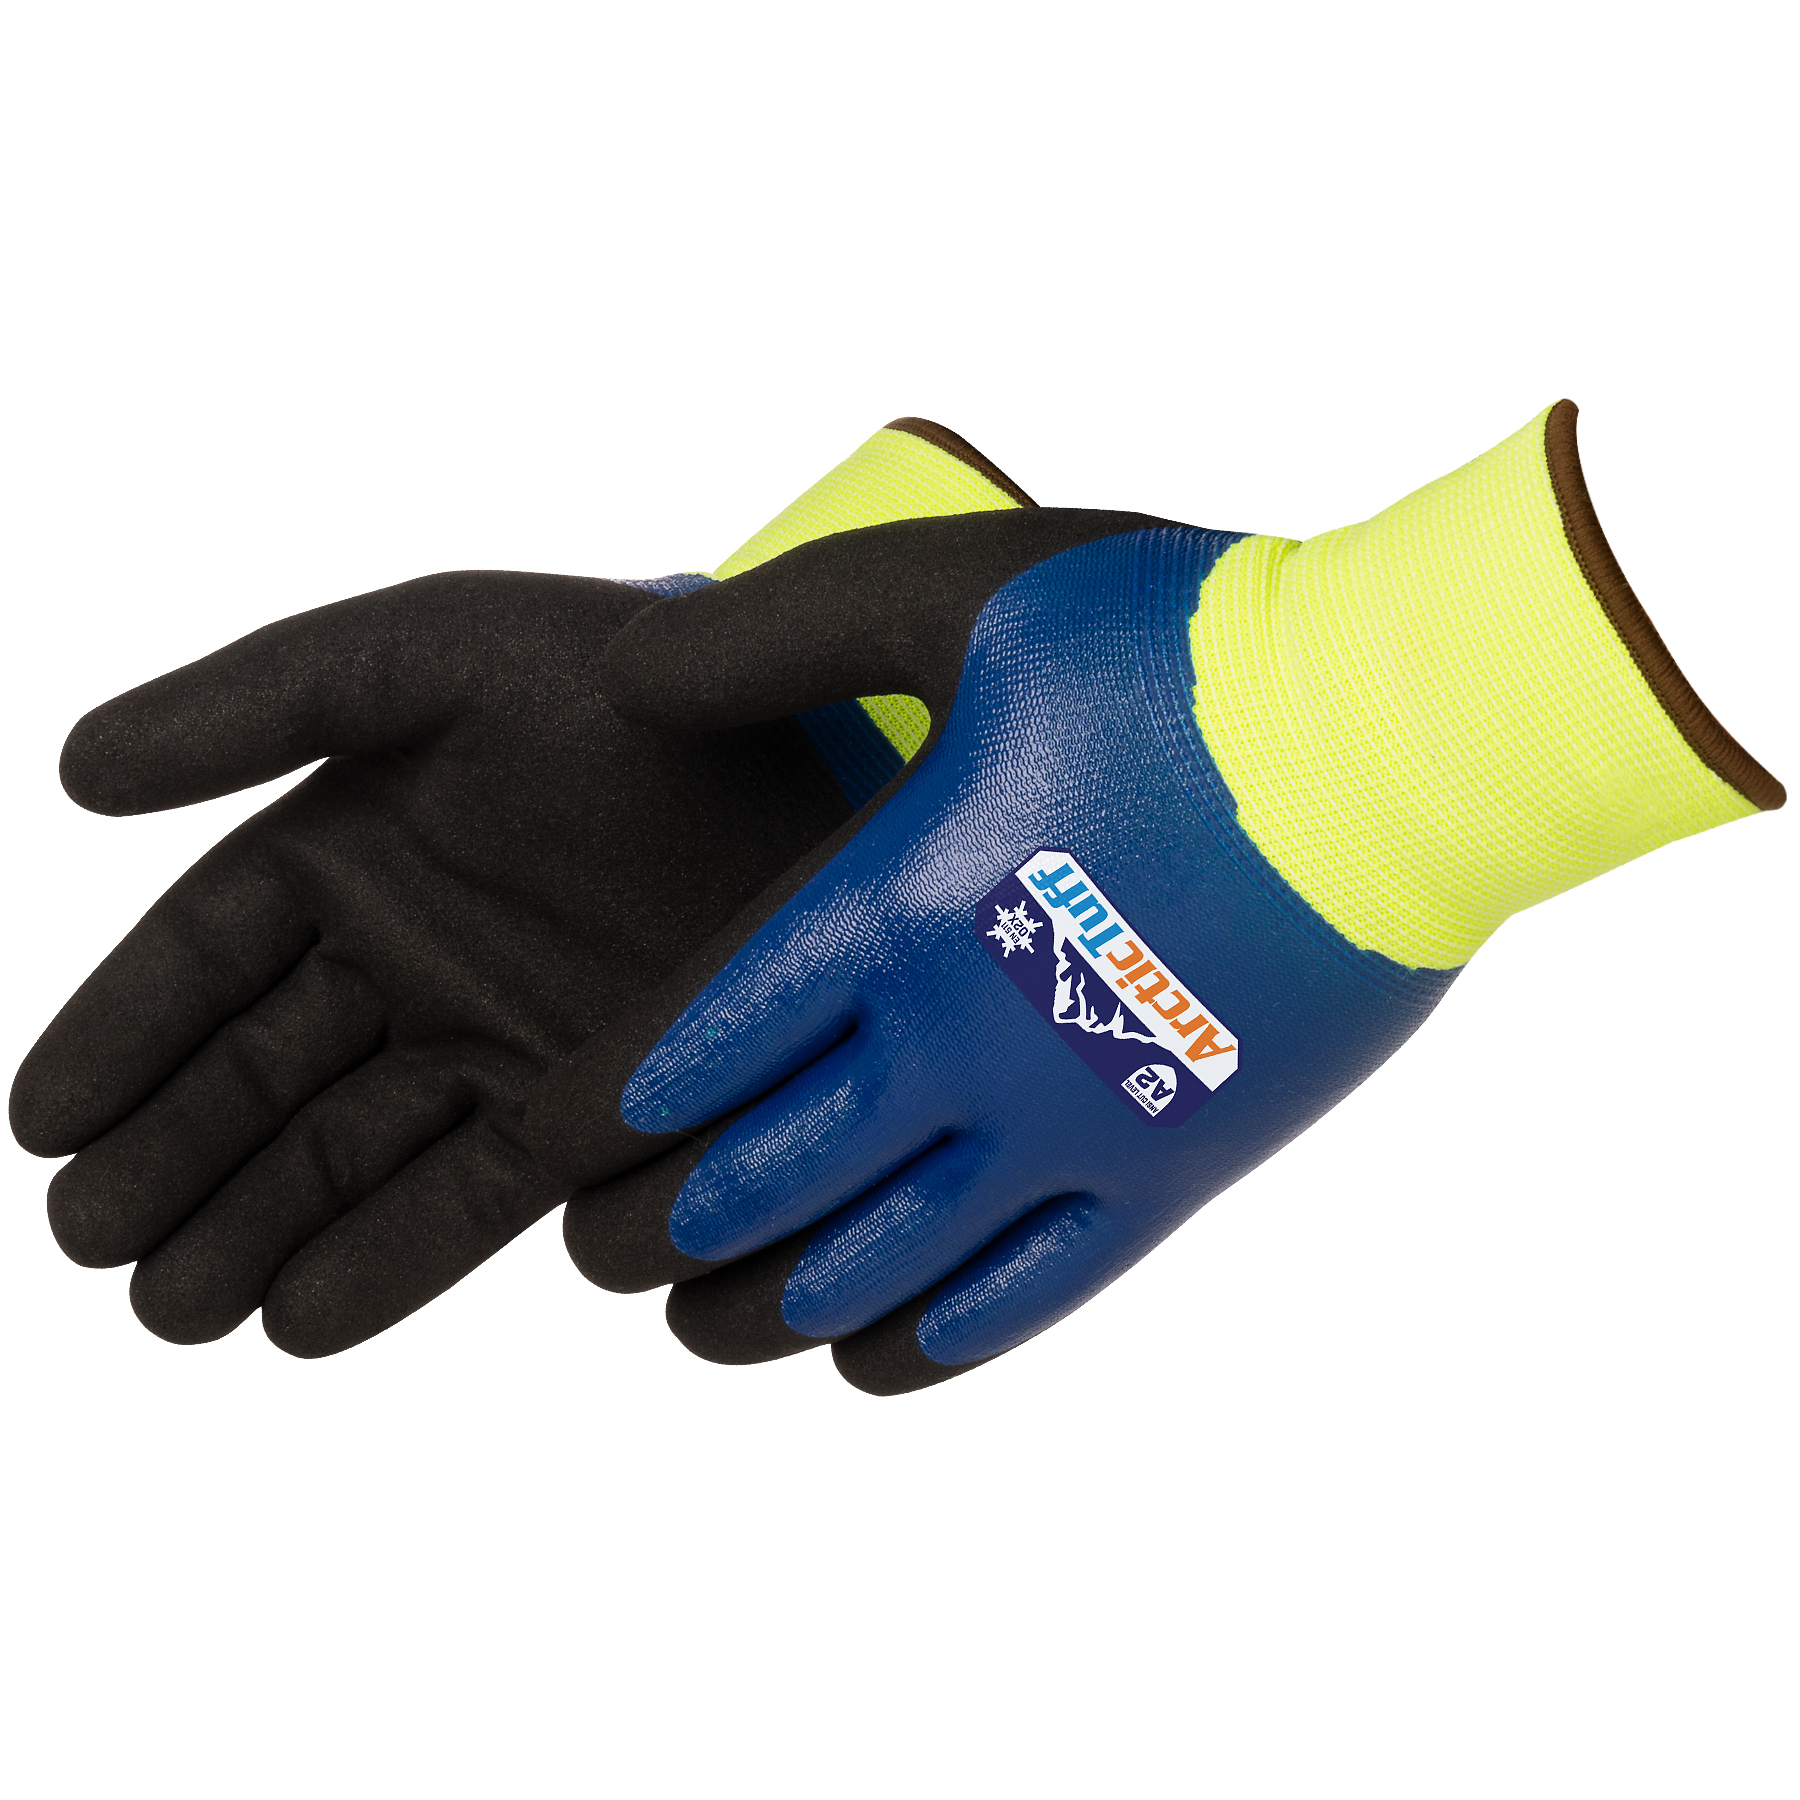 Black Nitrile-Dipped Gloves Large - Gray - ROC10TL